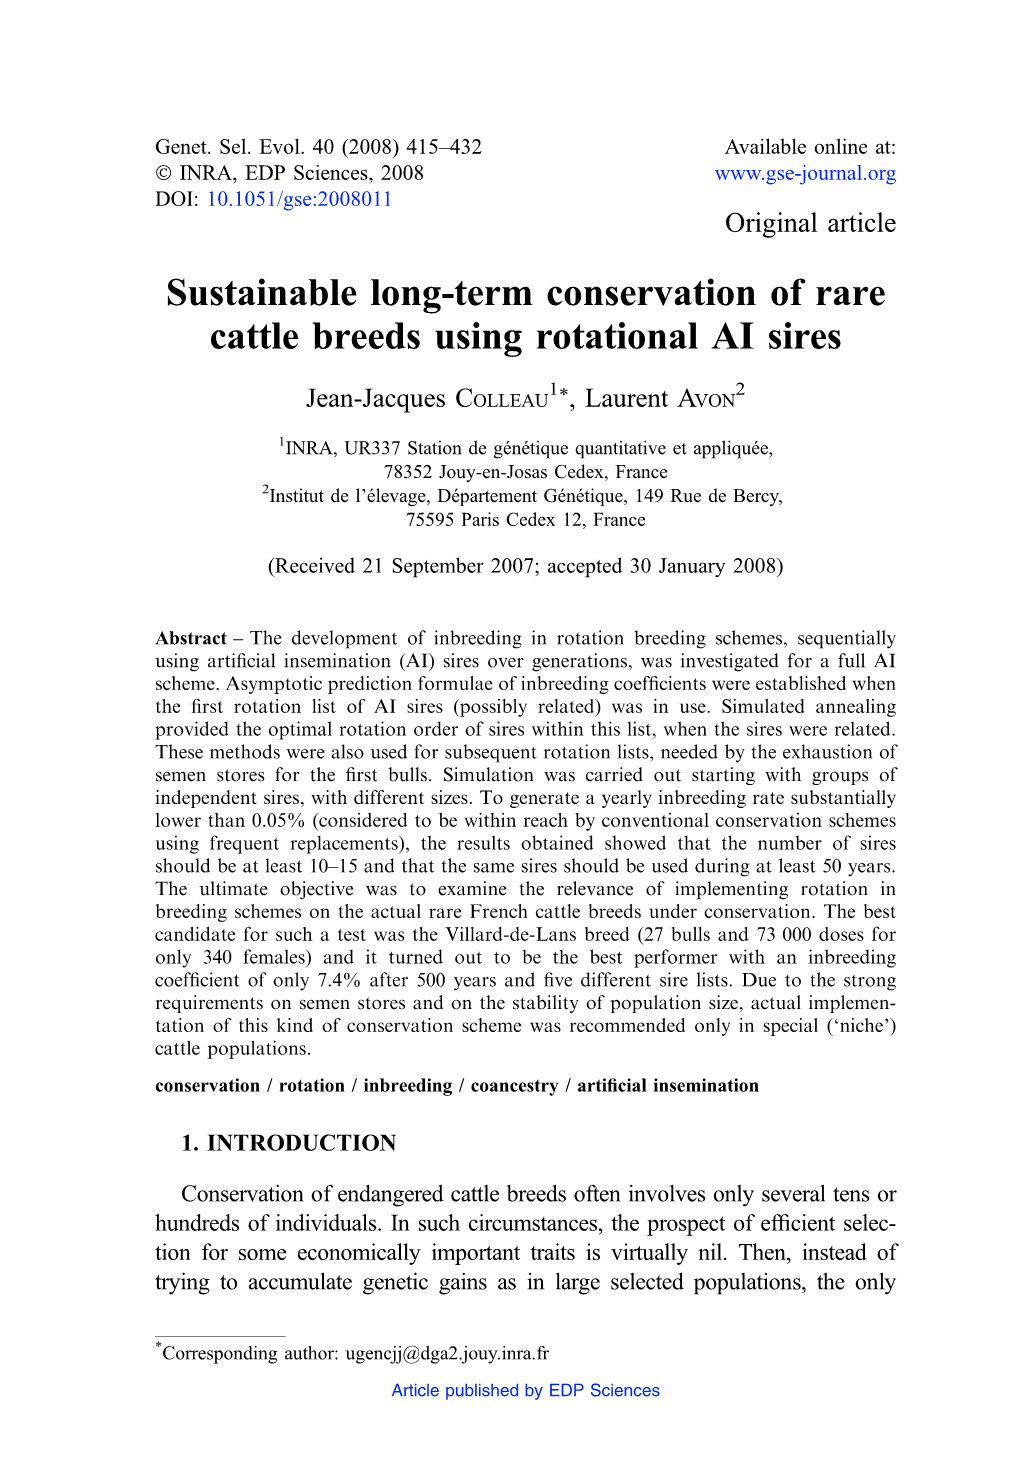 Sustainable Long-Term Conservation of Rare Cattle Breeds Using Rotational AI Sires